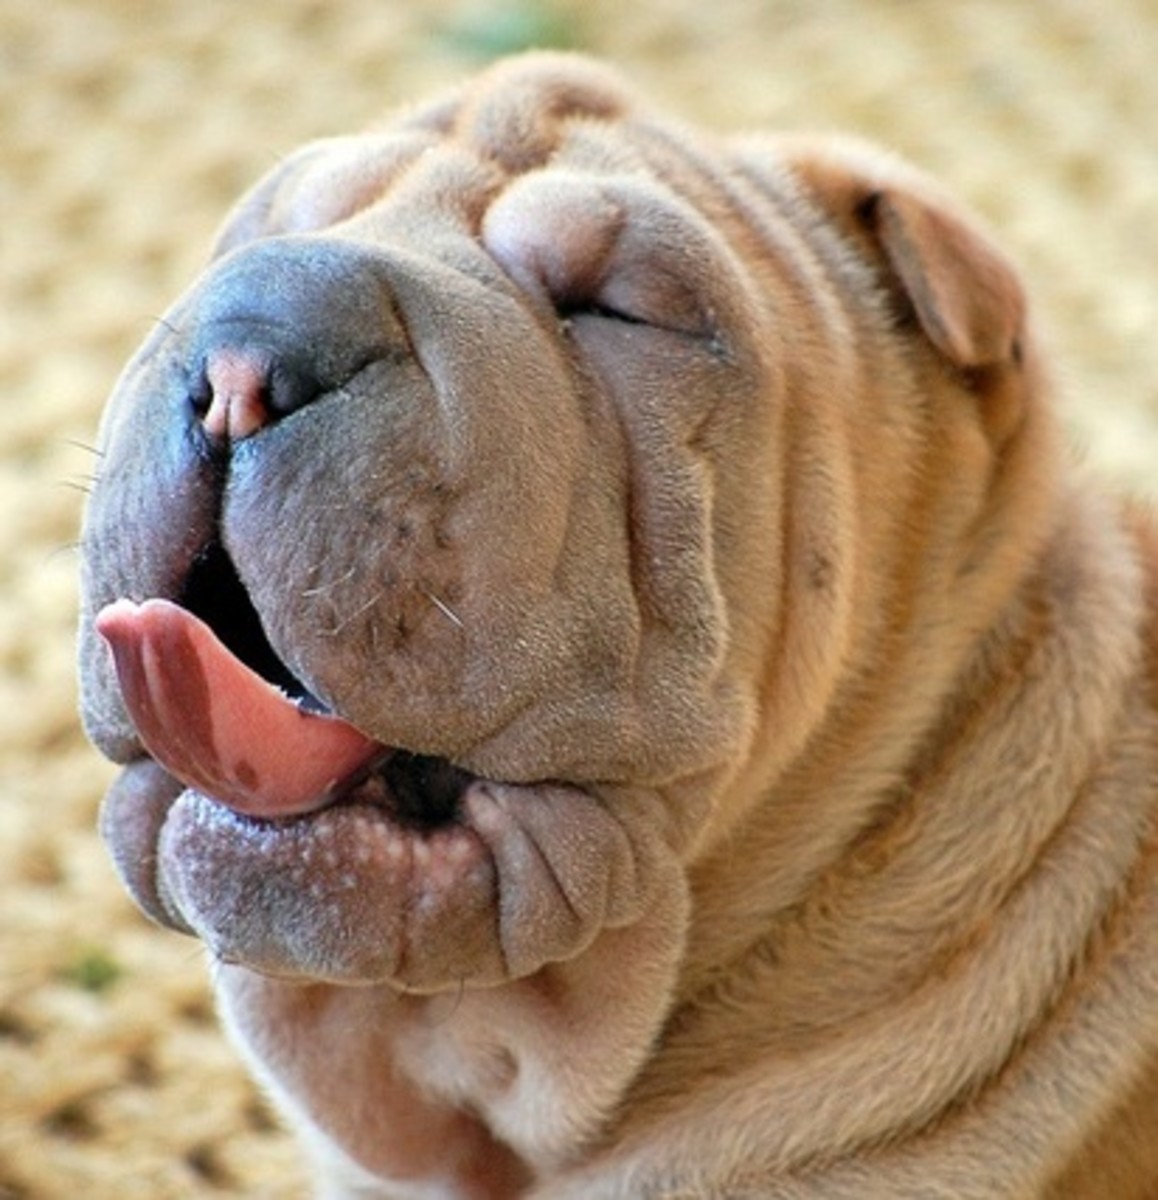 Dogs like the Shar-pei may have entropion and an eyelash rubs against the cornea and causes a red eye.